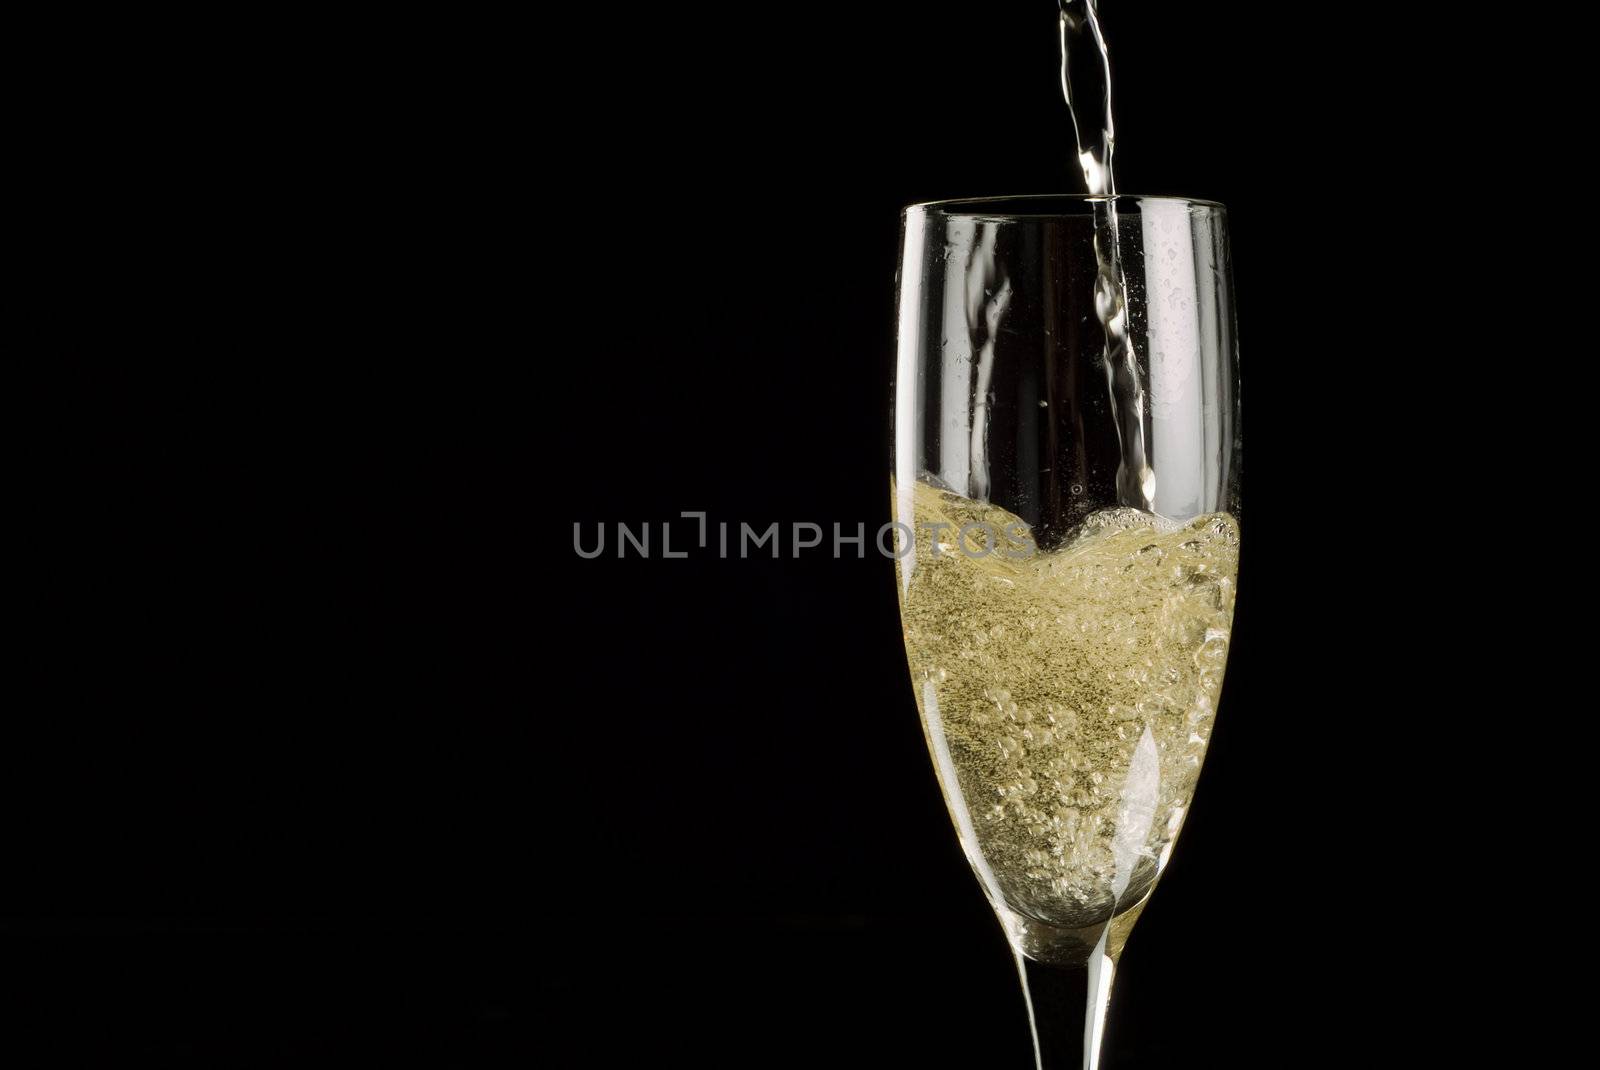 Single flute being filled with sparkling wine on a black background